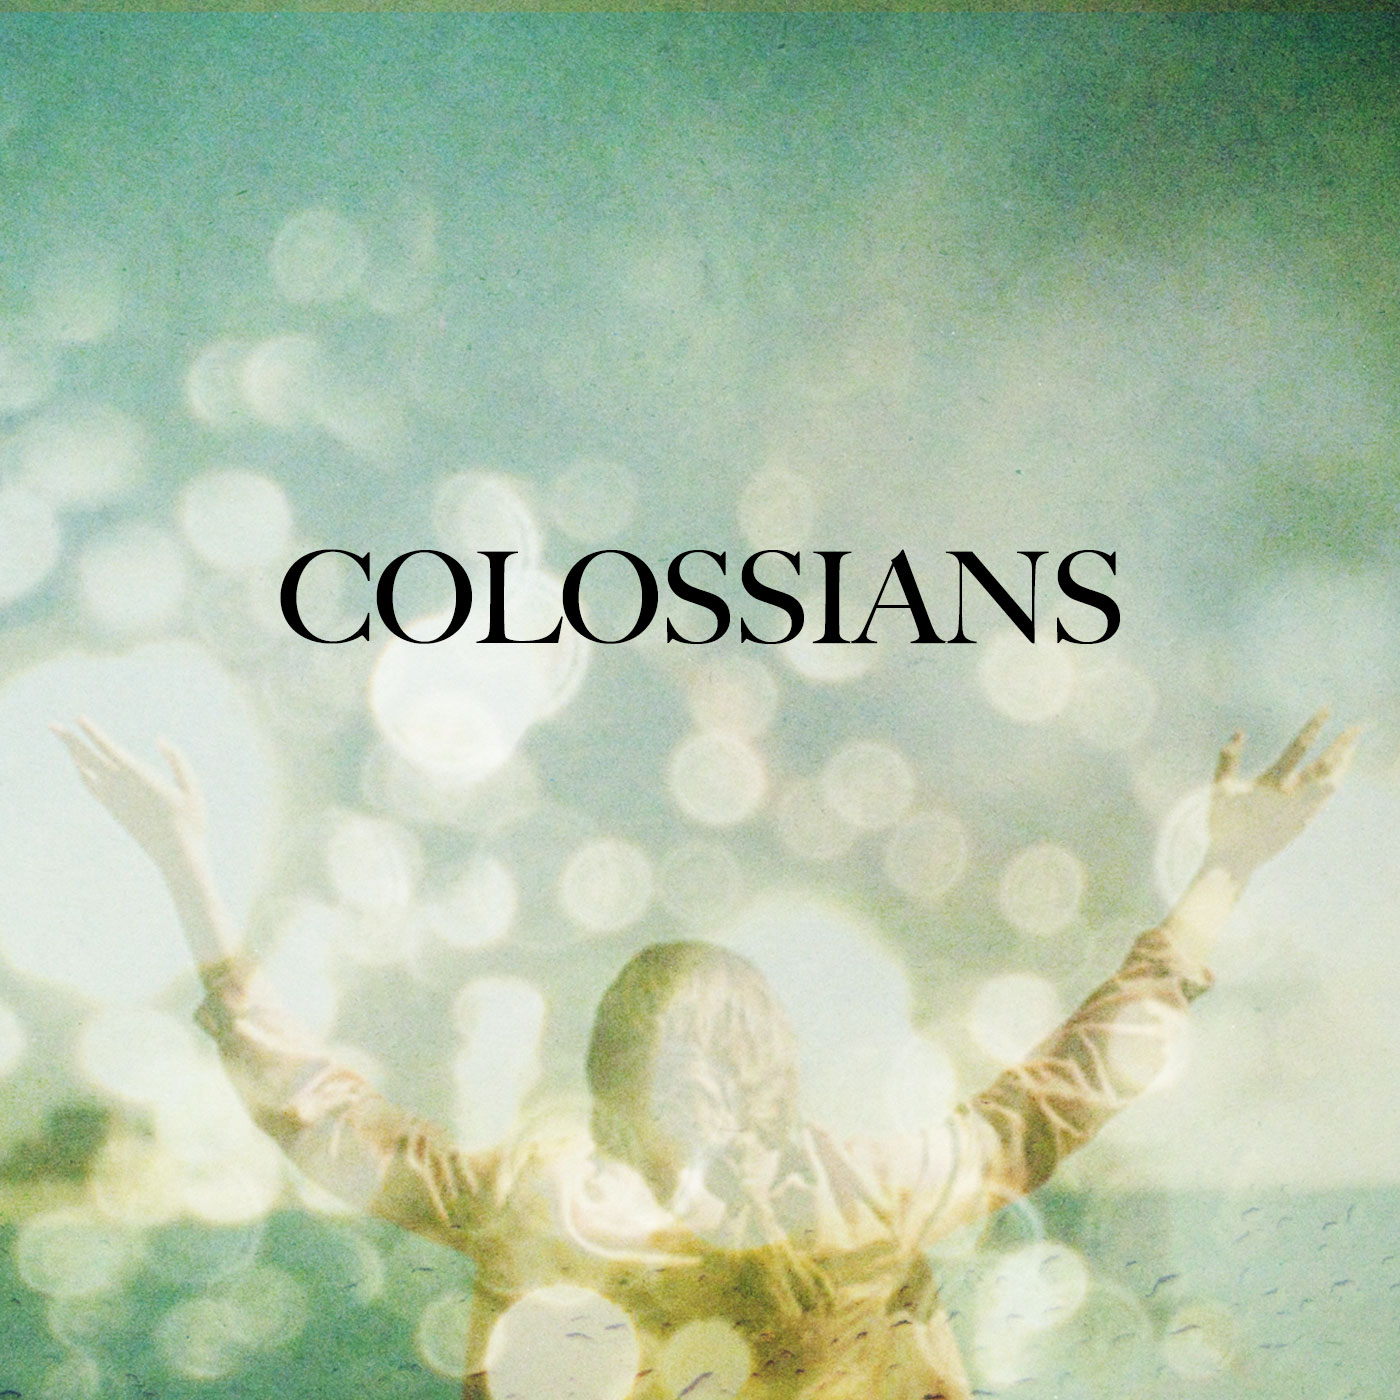 Chapter 2B - Letter to the Colossians